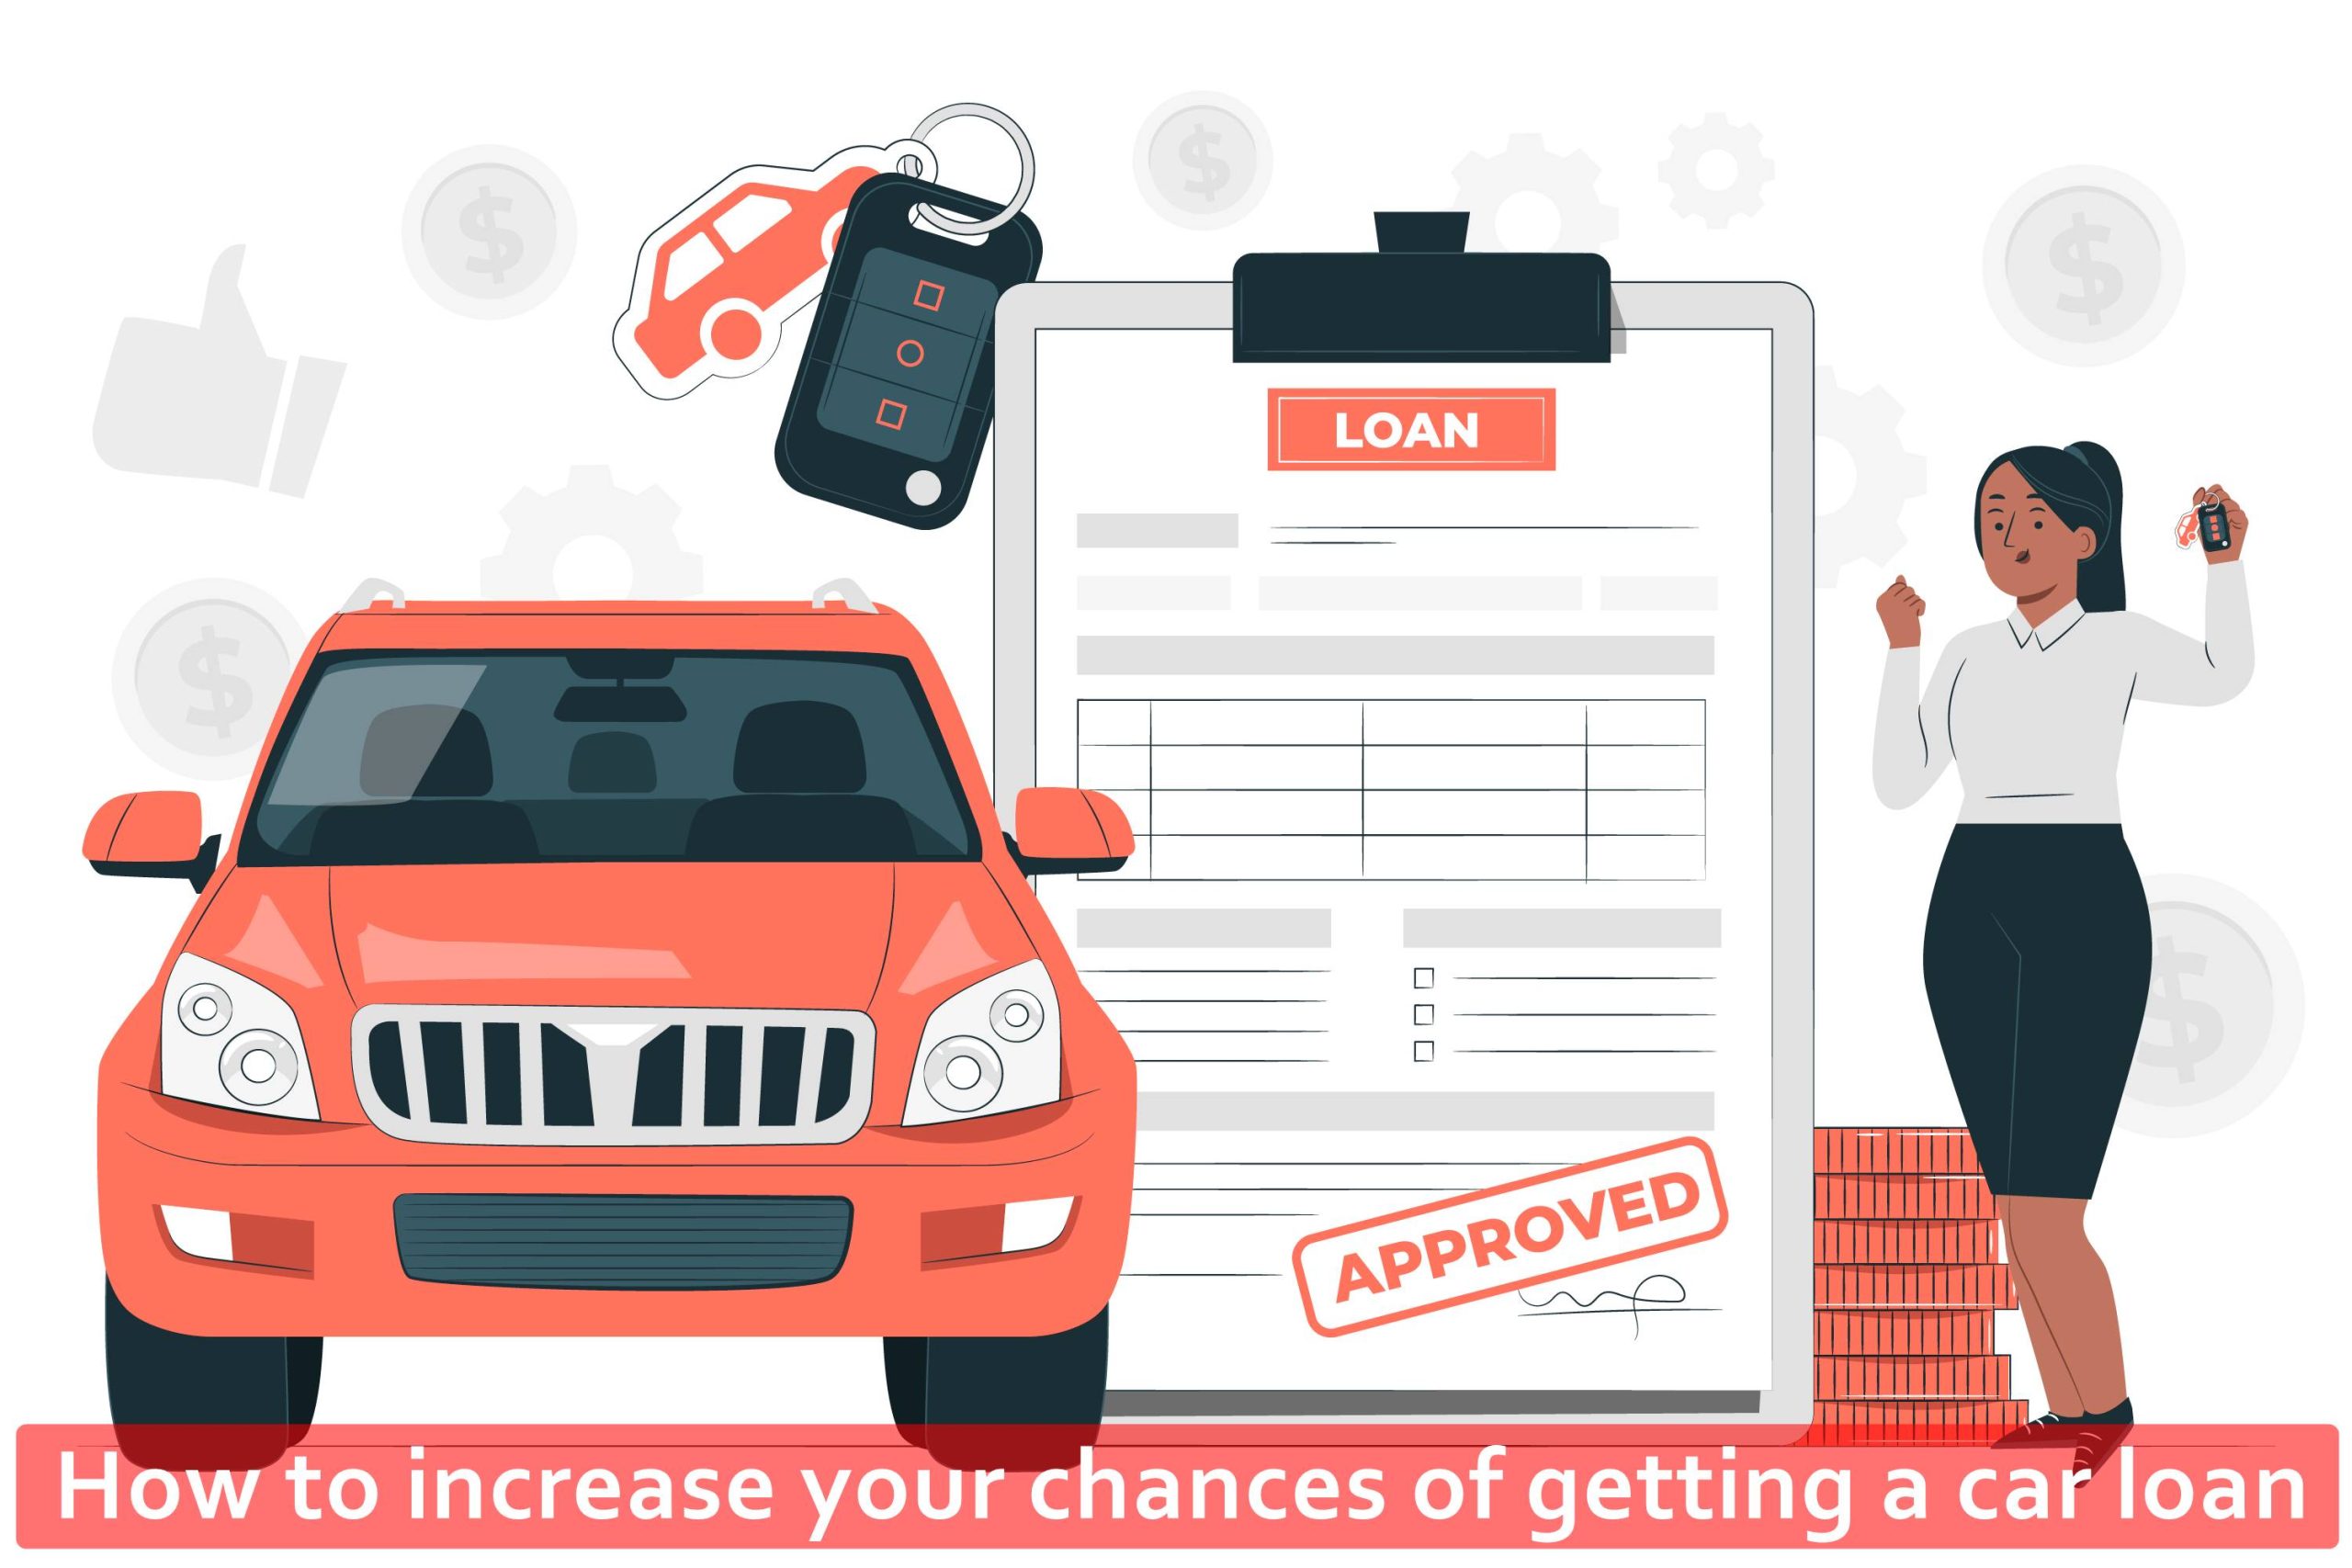 How to increase your chances of getting a car loan